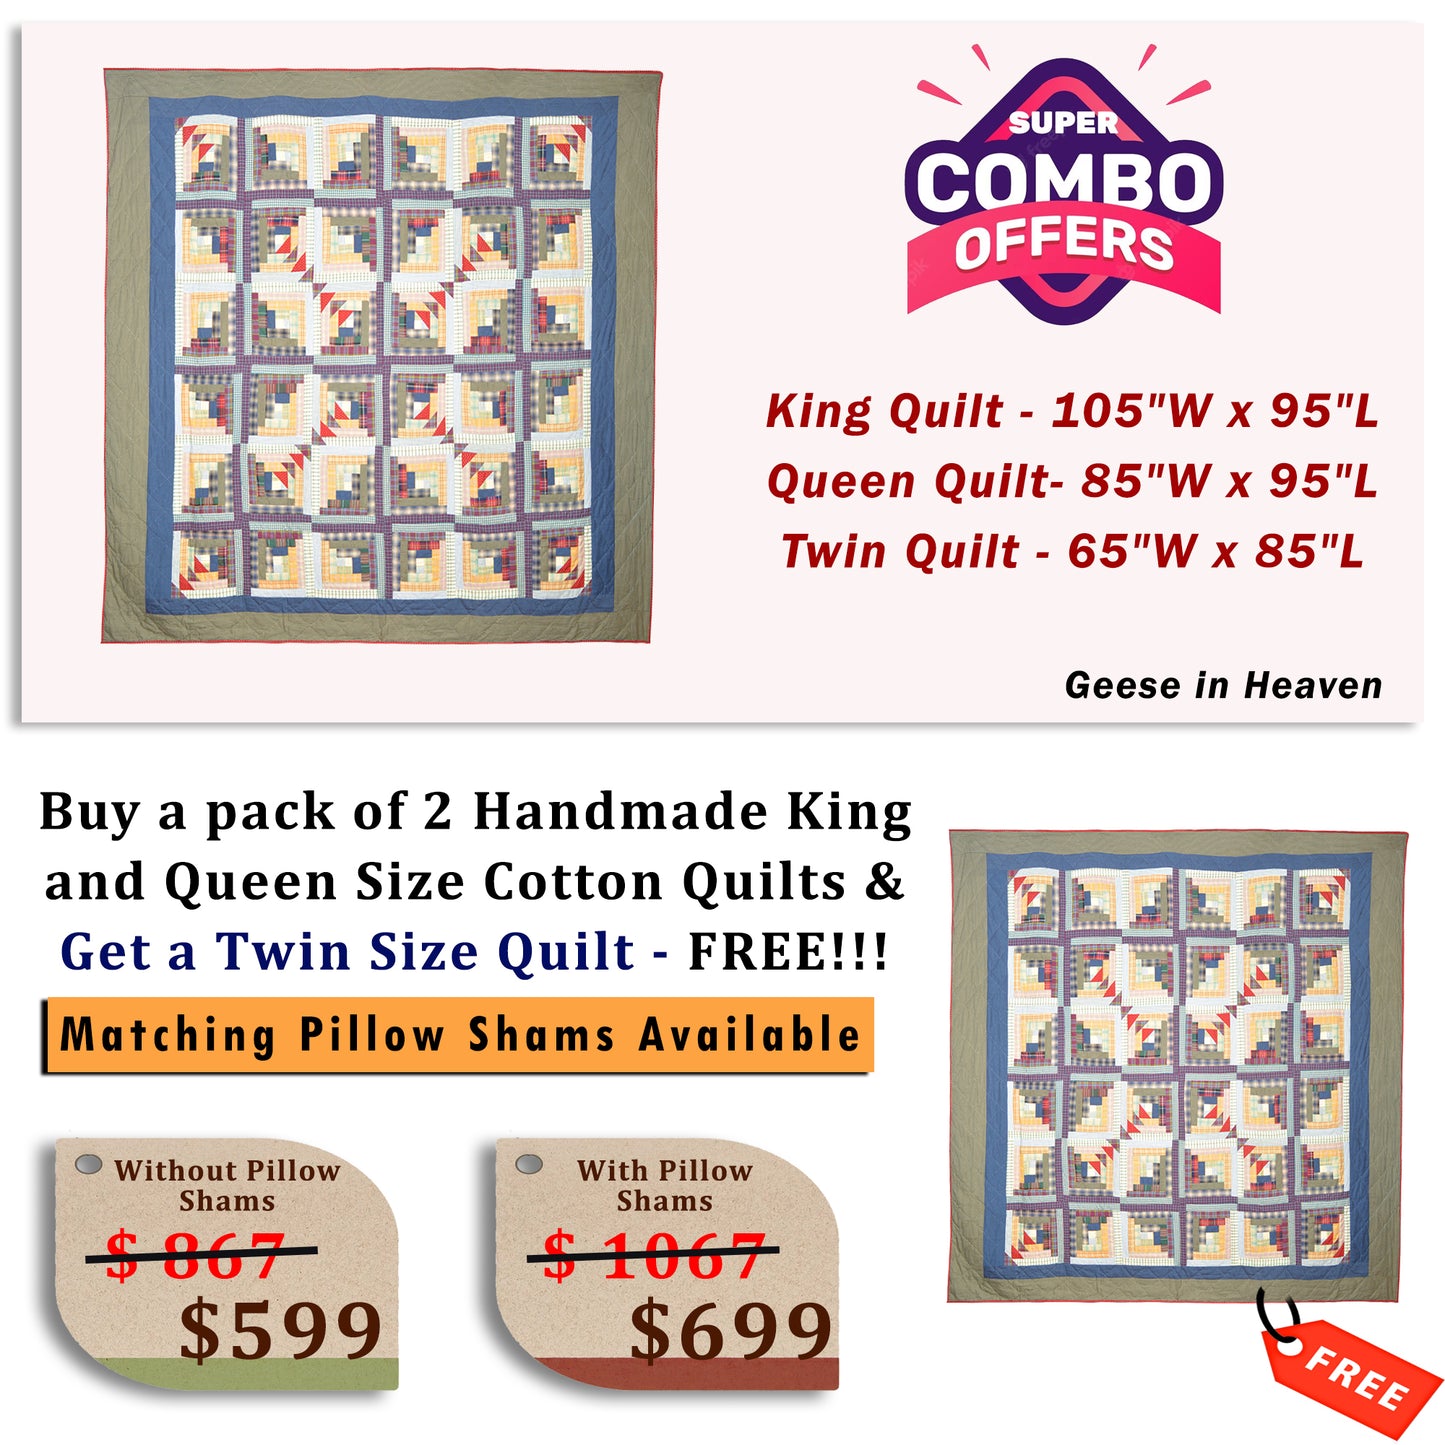 Geese in heaven - Buy a pack of King and Queen Size Quilt, and get a Twin Size Quilt FREE!!!